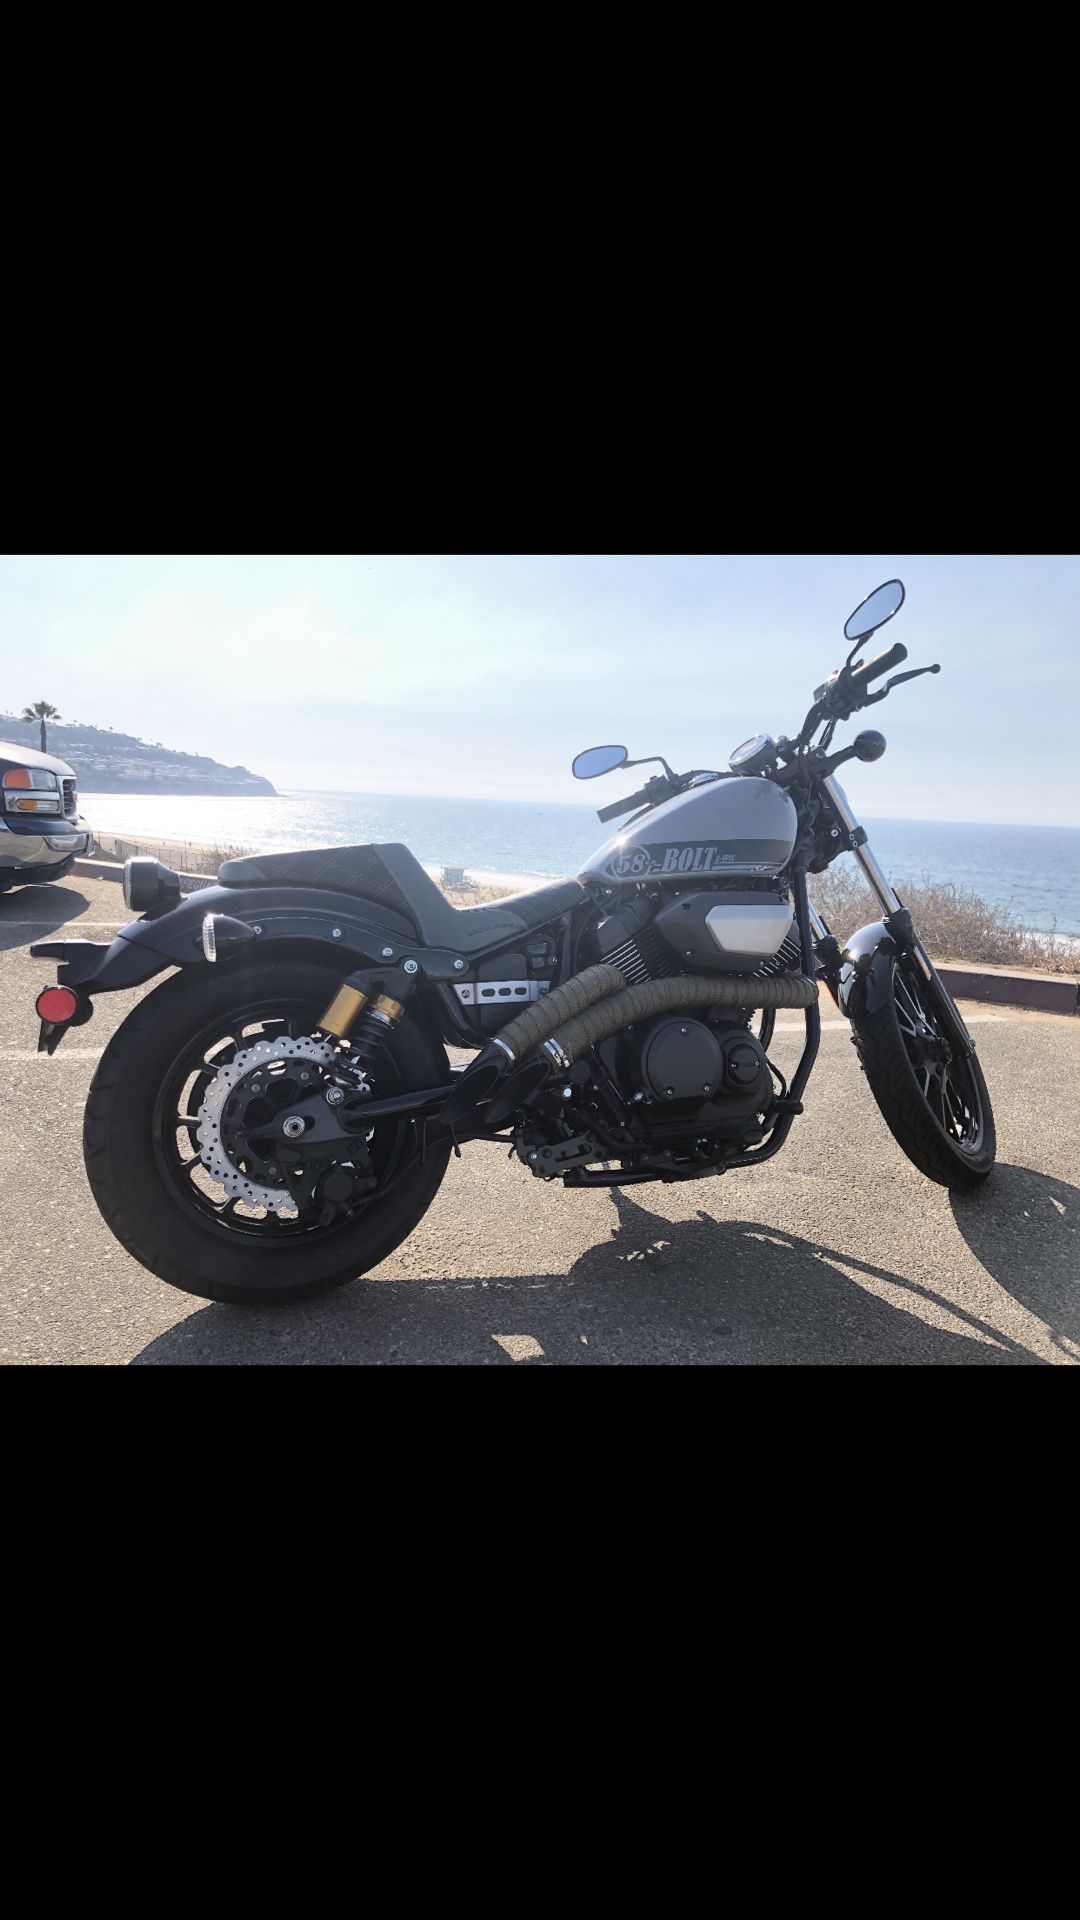 YAMAHA BOLT MOTORCYCLE 2018 GREAT CONDITION